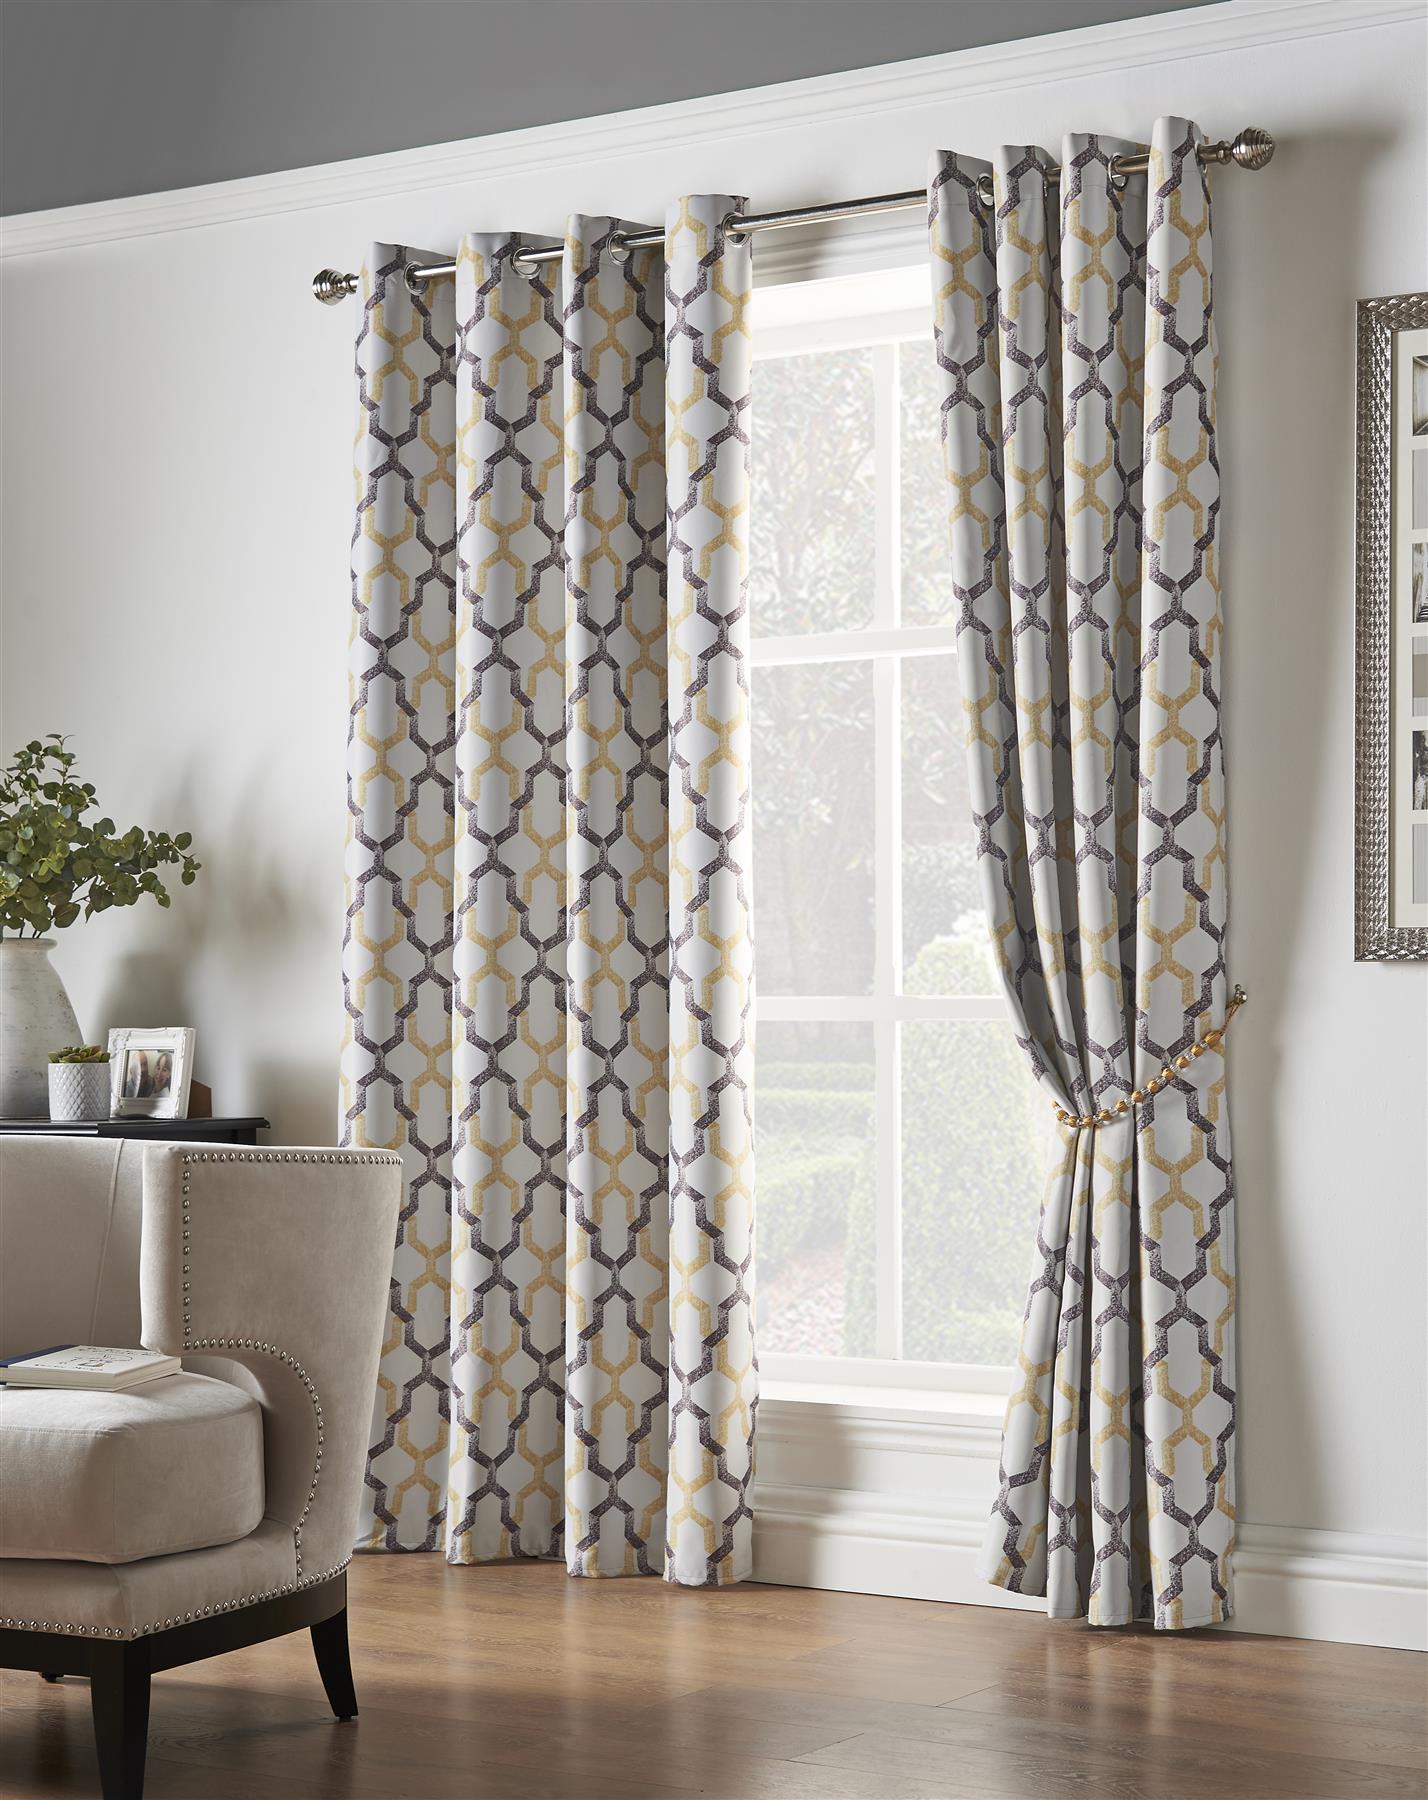 Ochre Geo Blackout Thermal Eyelet Curtains - Pair